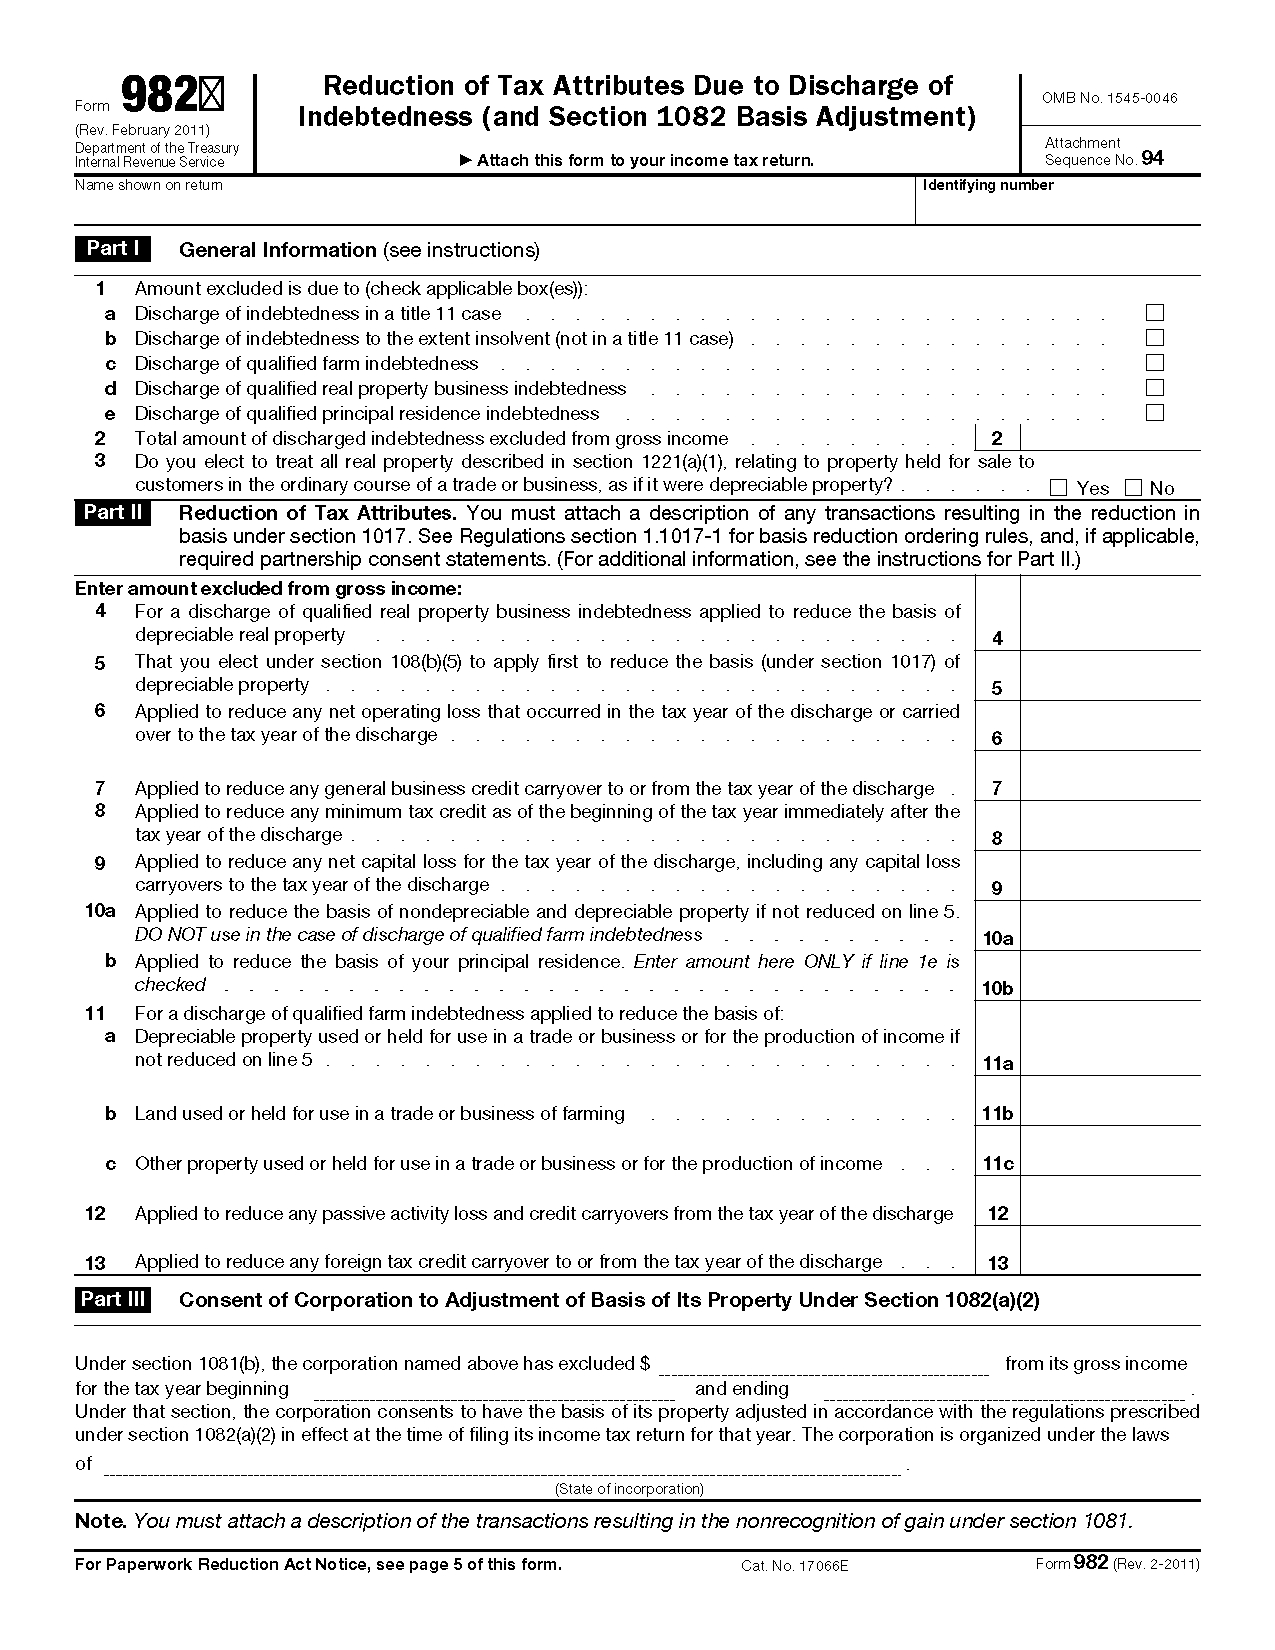 001 Irs Form Beautiful 982 Templates Identifying Number Tax Inside Form 982 Insolvency Worksheet